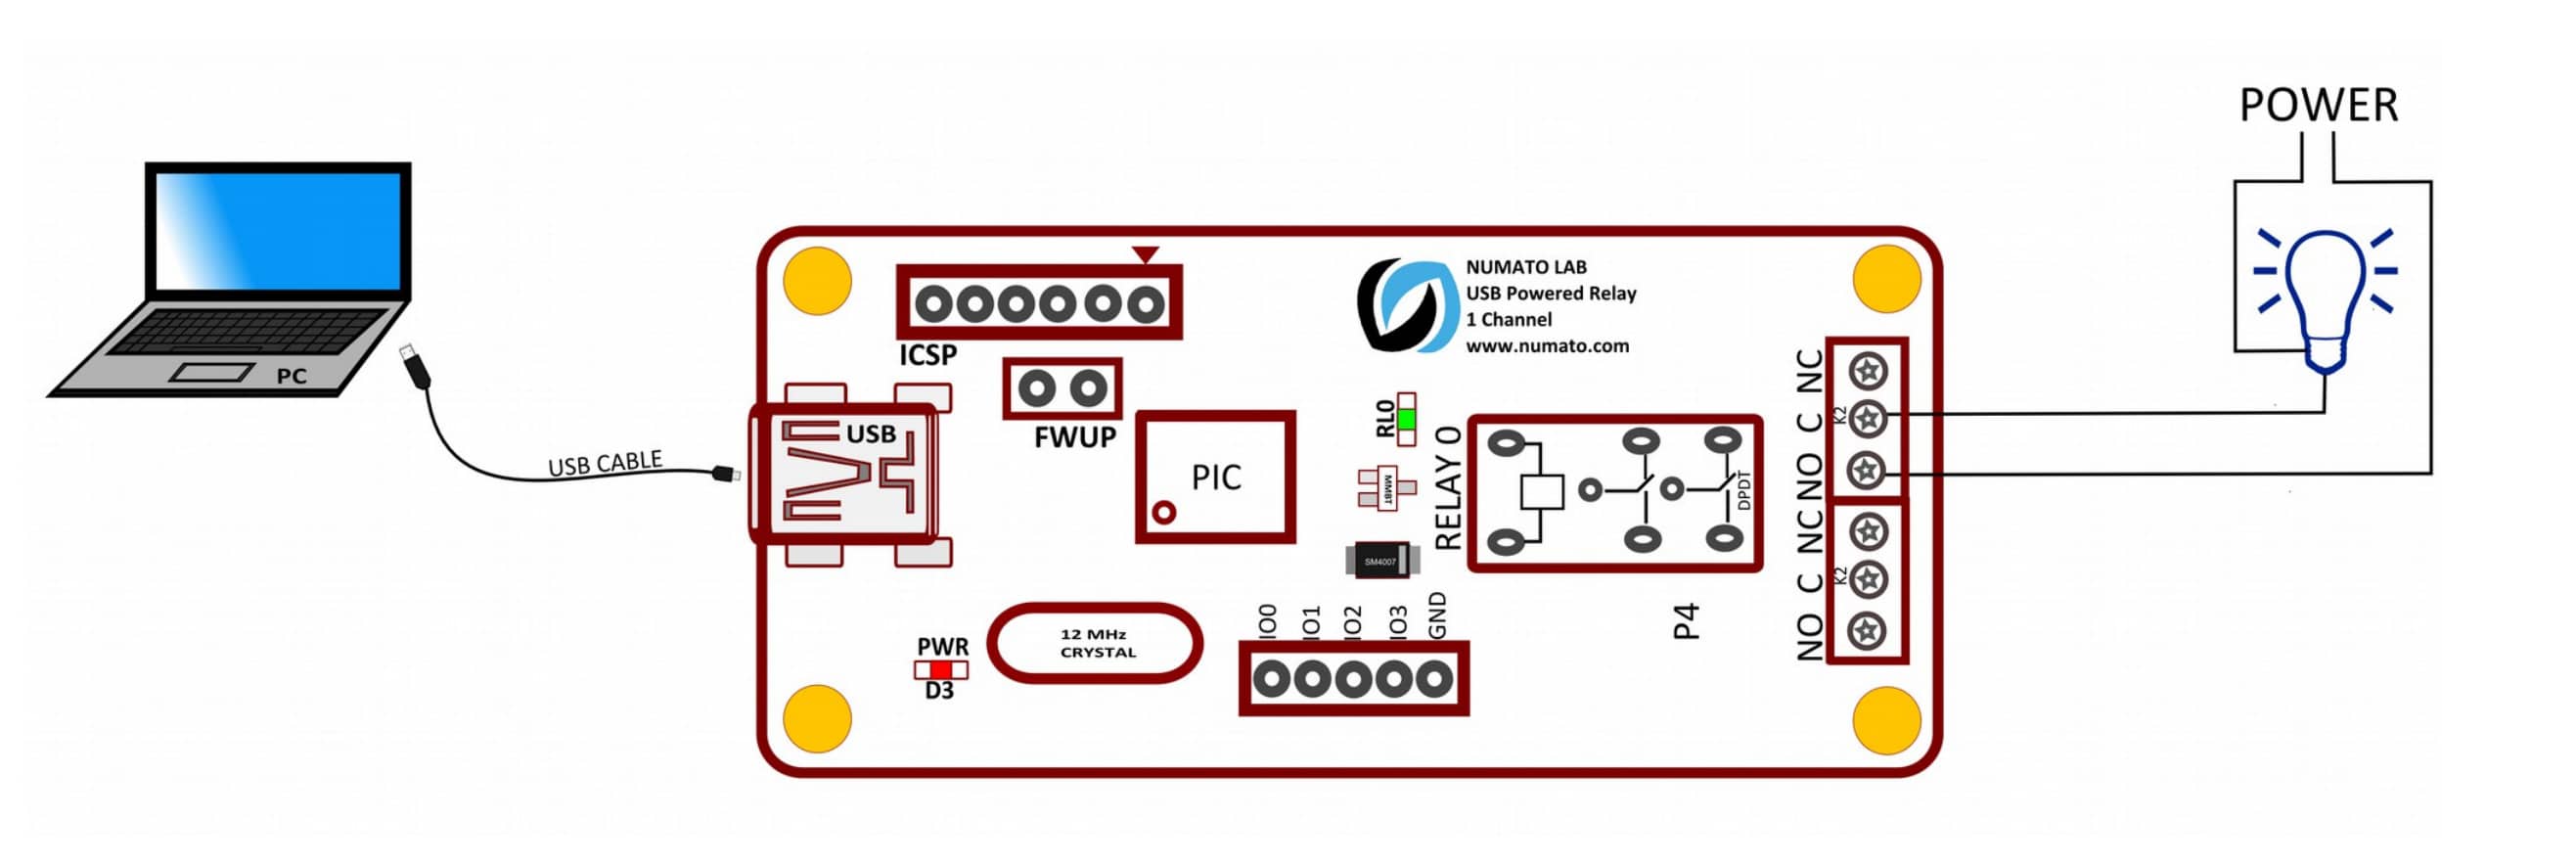 1 Channel USB Powered Relay Connection Details